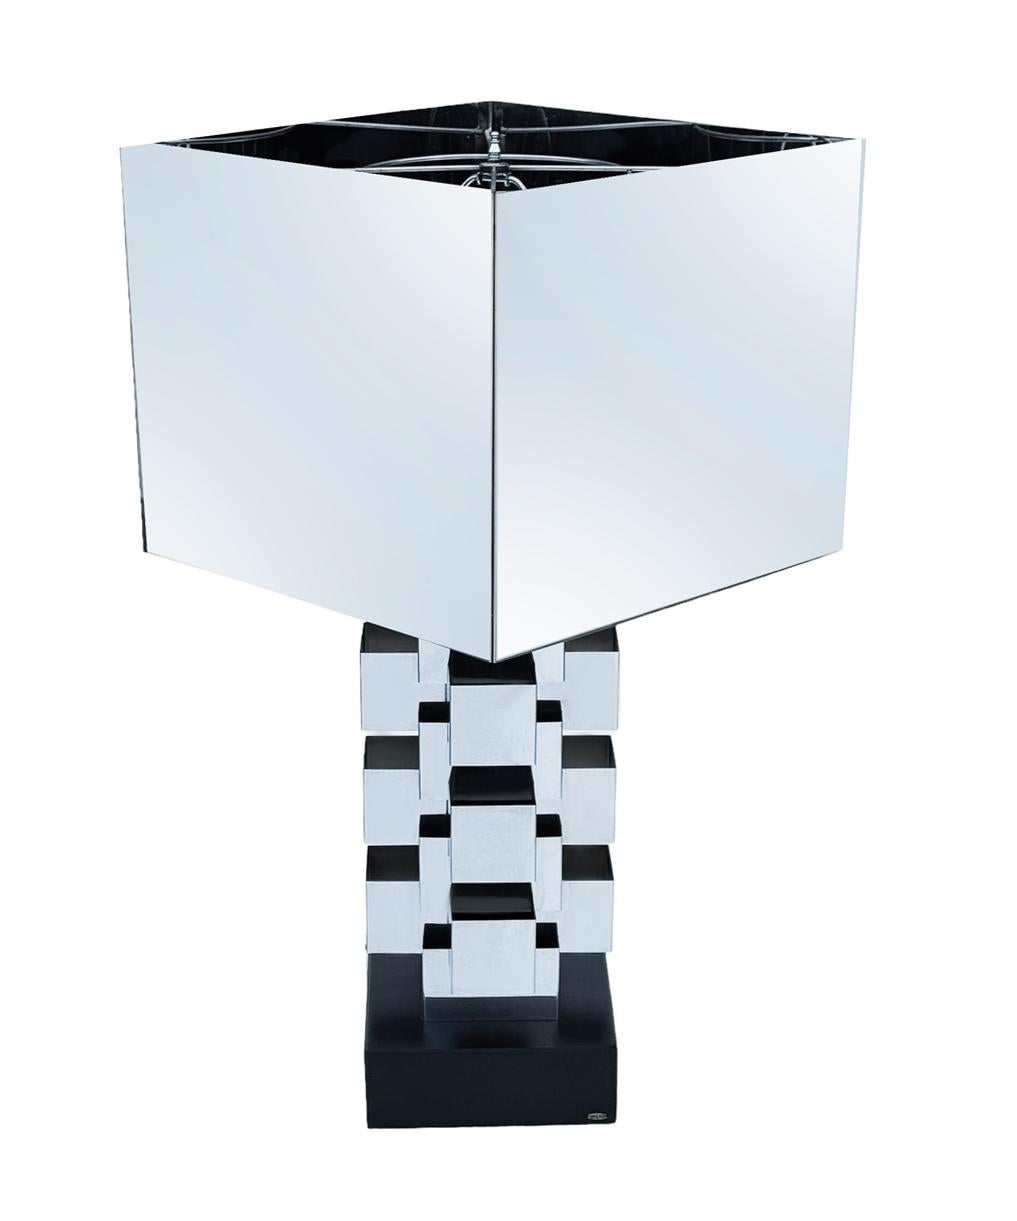 Late 20th Century Signed Mid Century Modern Skyscraper Table Lamp by Curtis Jere in Mirror Chrome For Sale